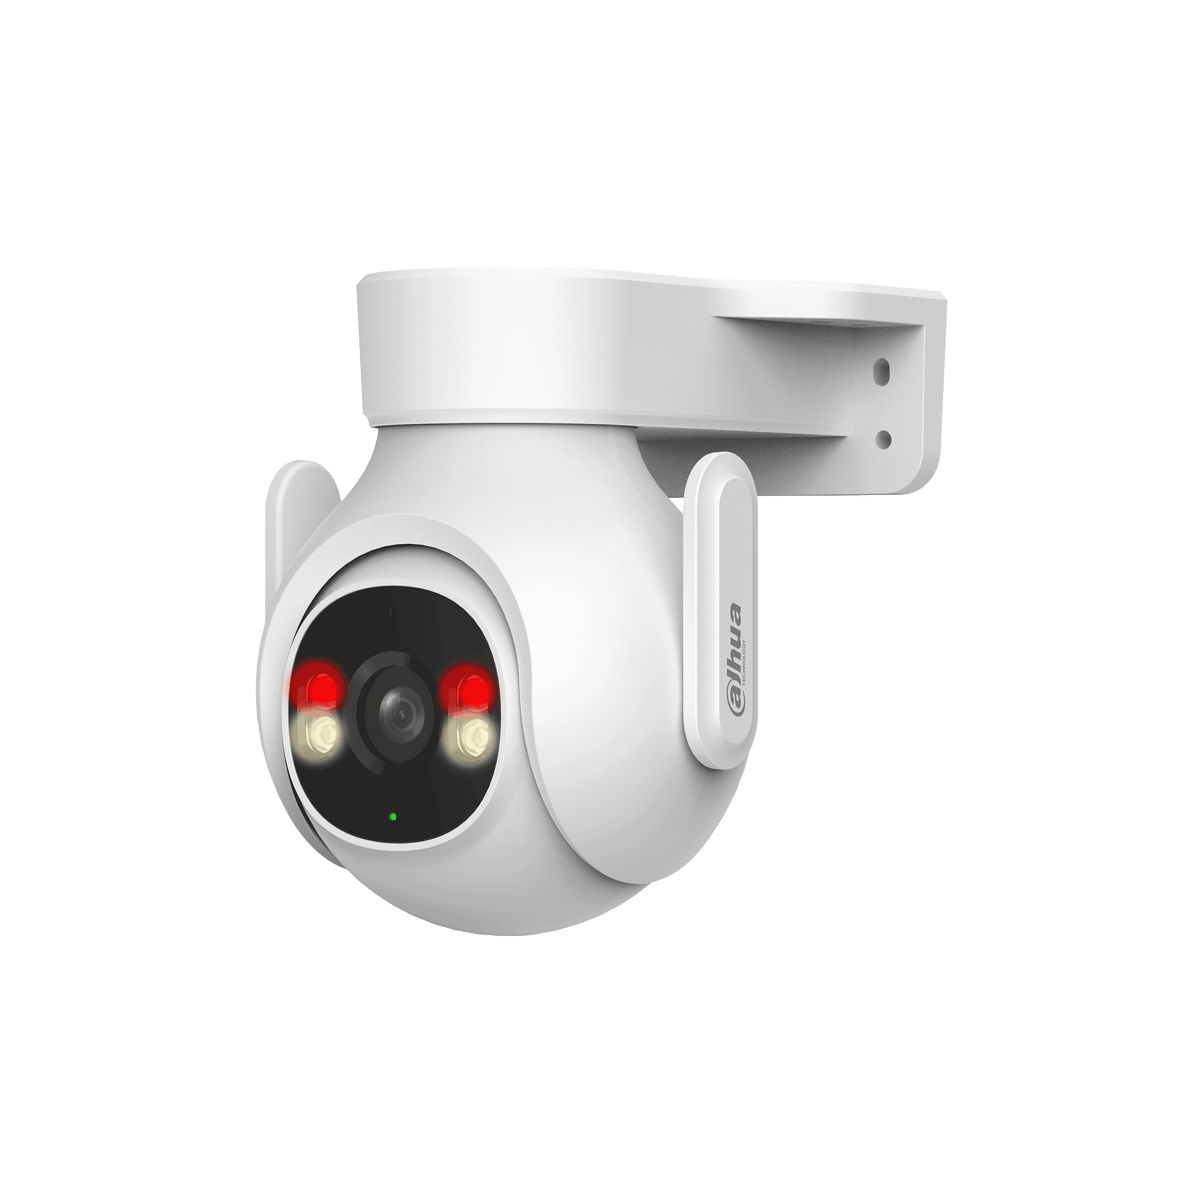 DAHUA P5B-PV 5MP Outdoor Full-color Active Deterrence Fixed-focal Wi-Fi Pan & Tilt Network Camera